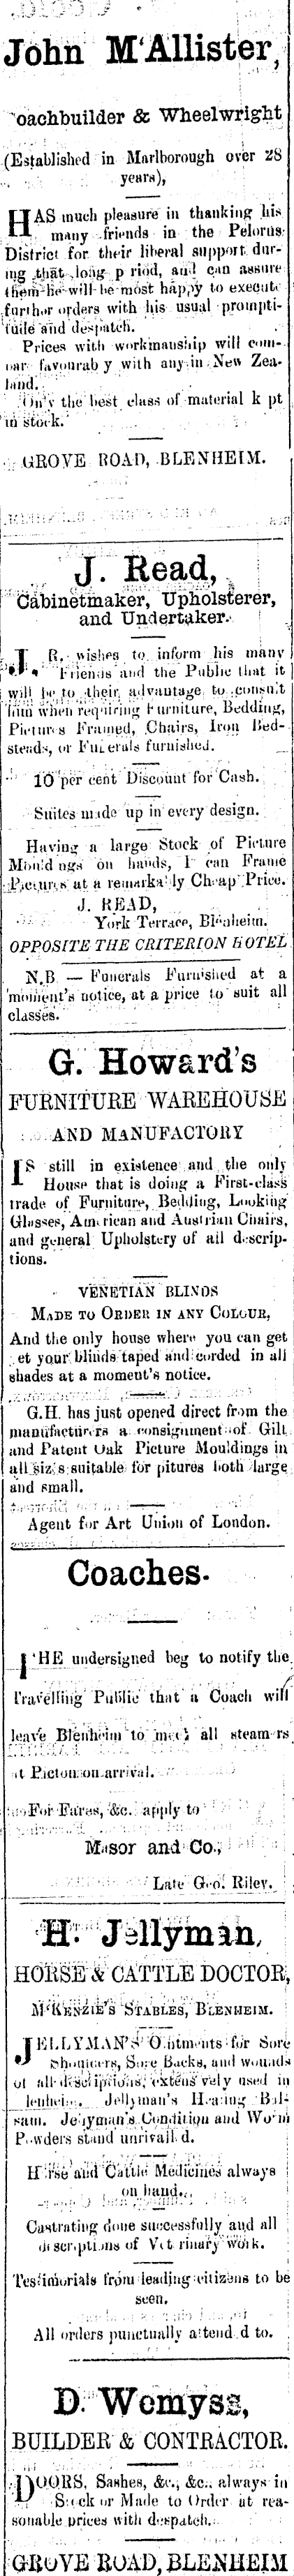 Papers | Newspapers | Pelorus Guardian and Miners' | 25 1890 | Page 4 Advertisements Column